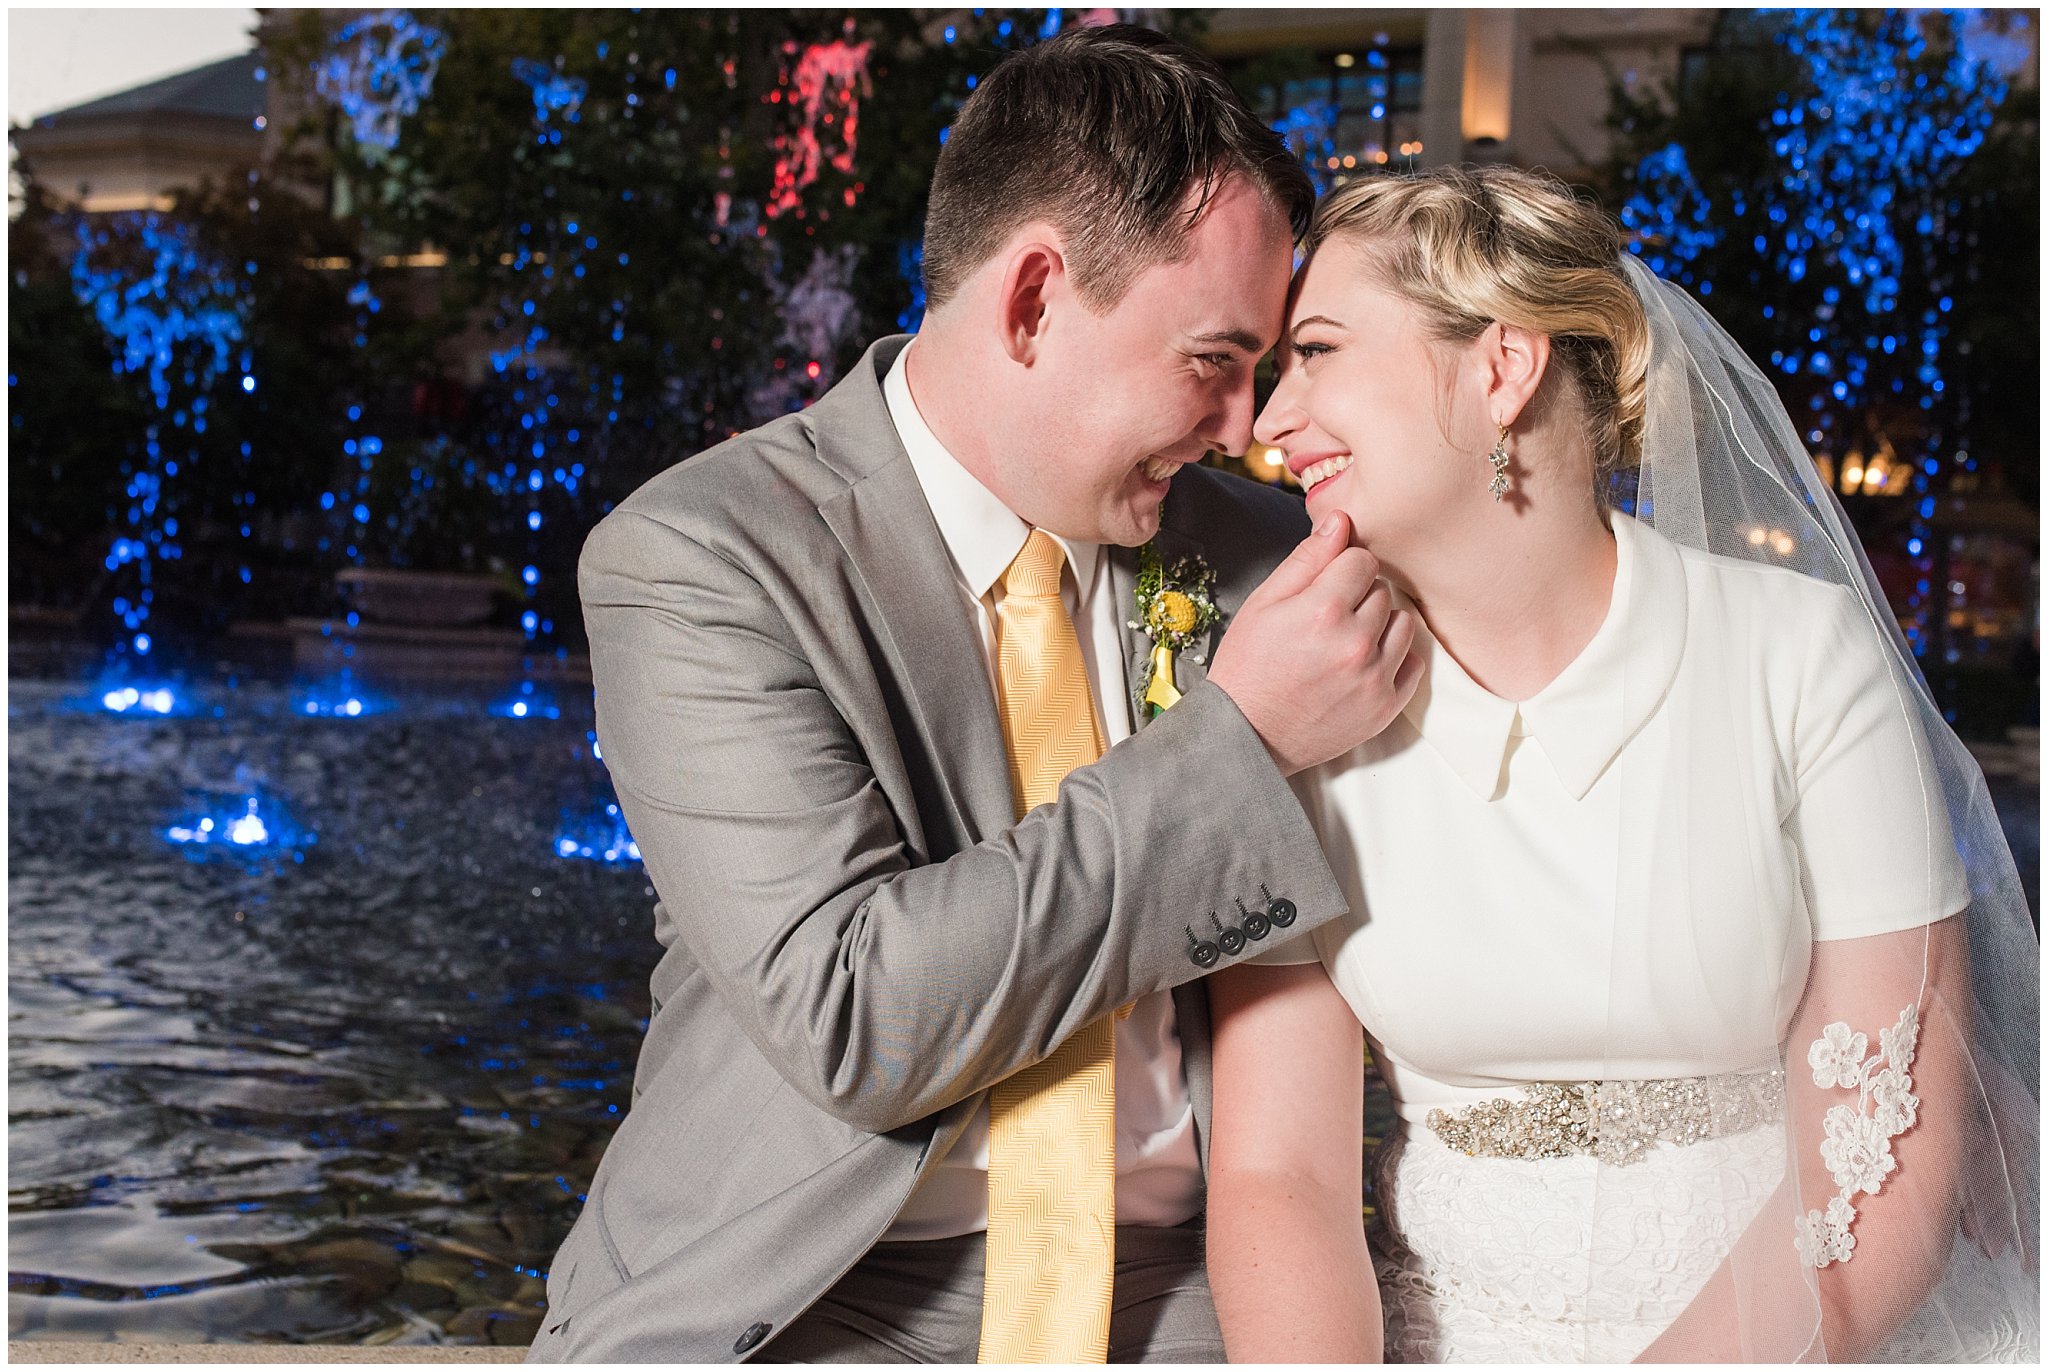 Outdoor fountain bride and groom portraits at night with fountains at Fountain View Event Venue at Station Park | Fountain View Event Venue and Bountiful Temple Wedding | Jessie and Dallin Photography